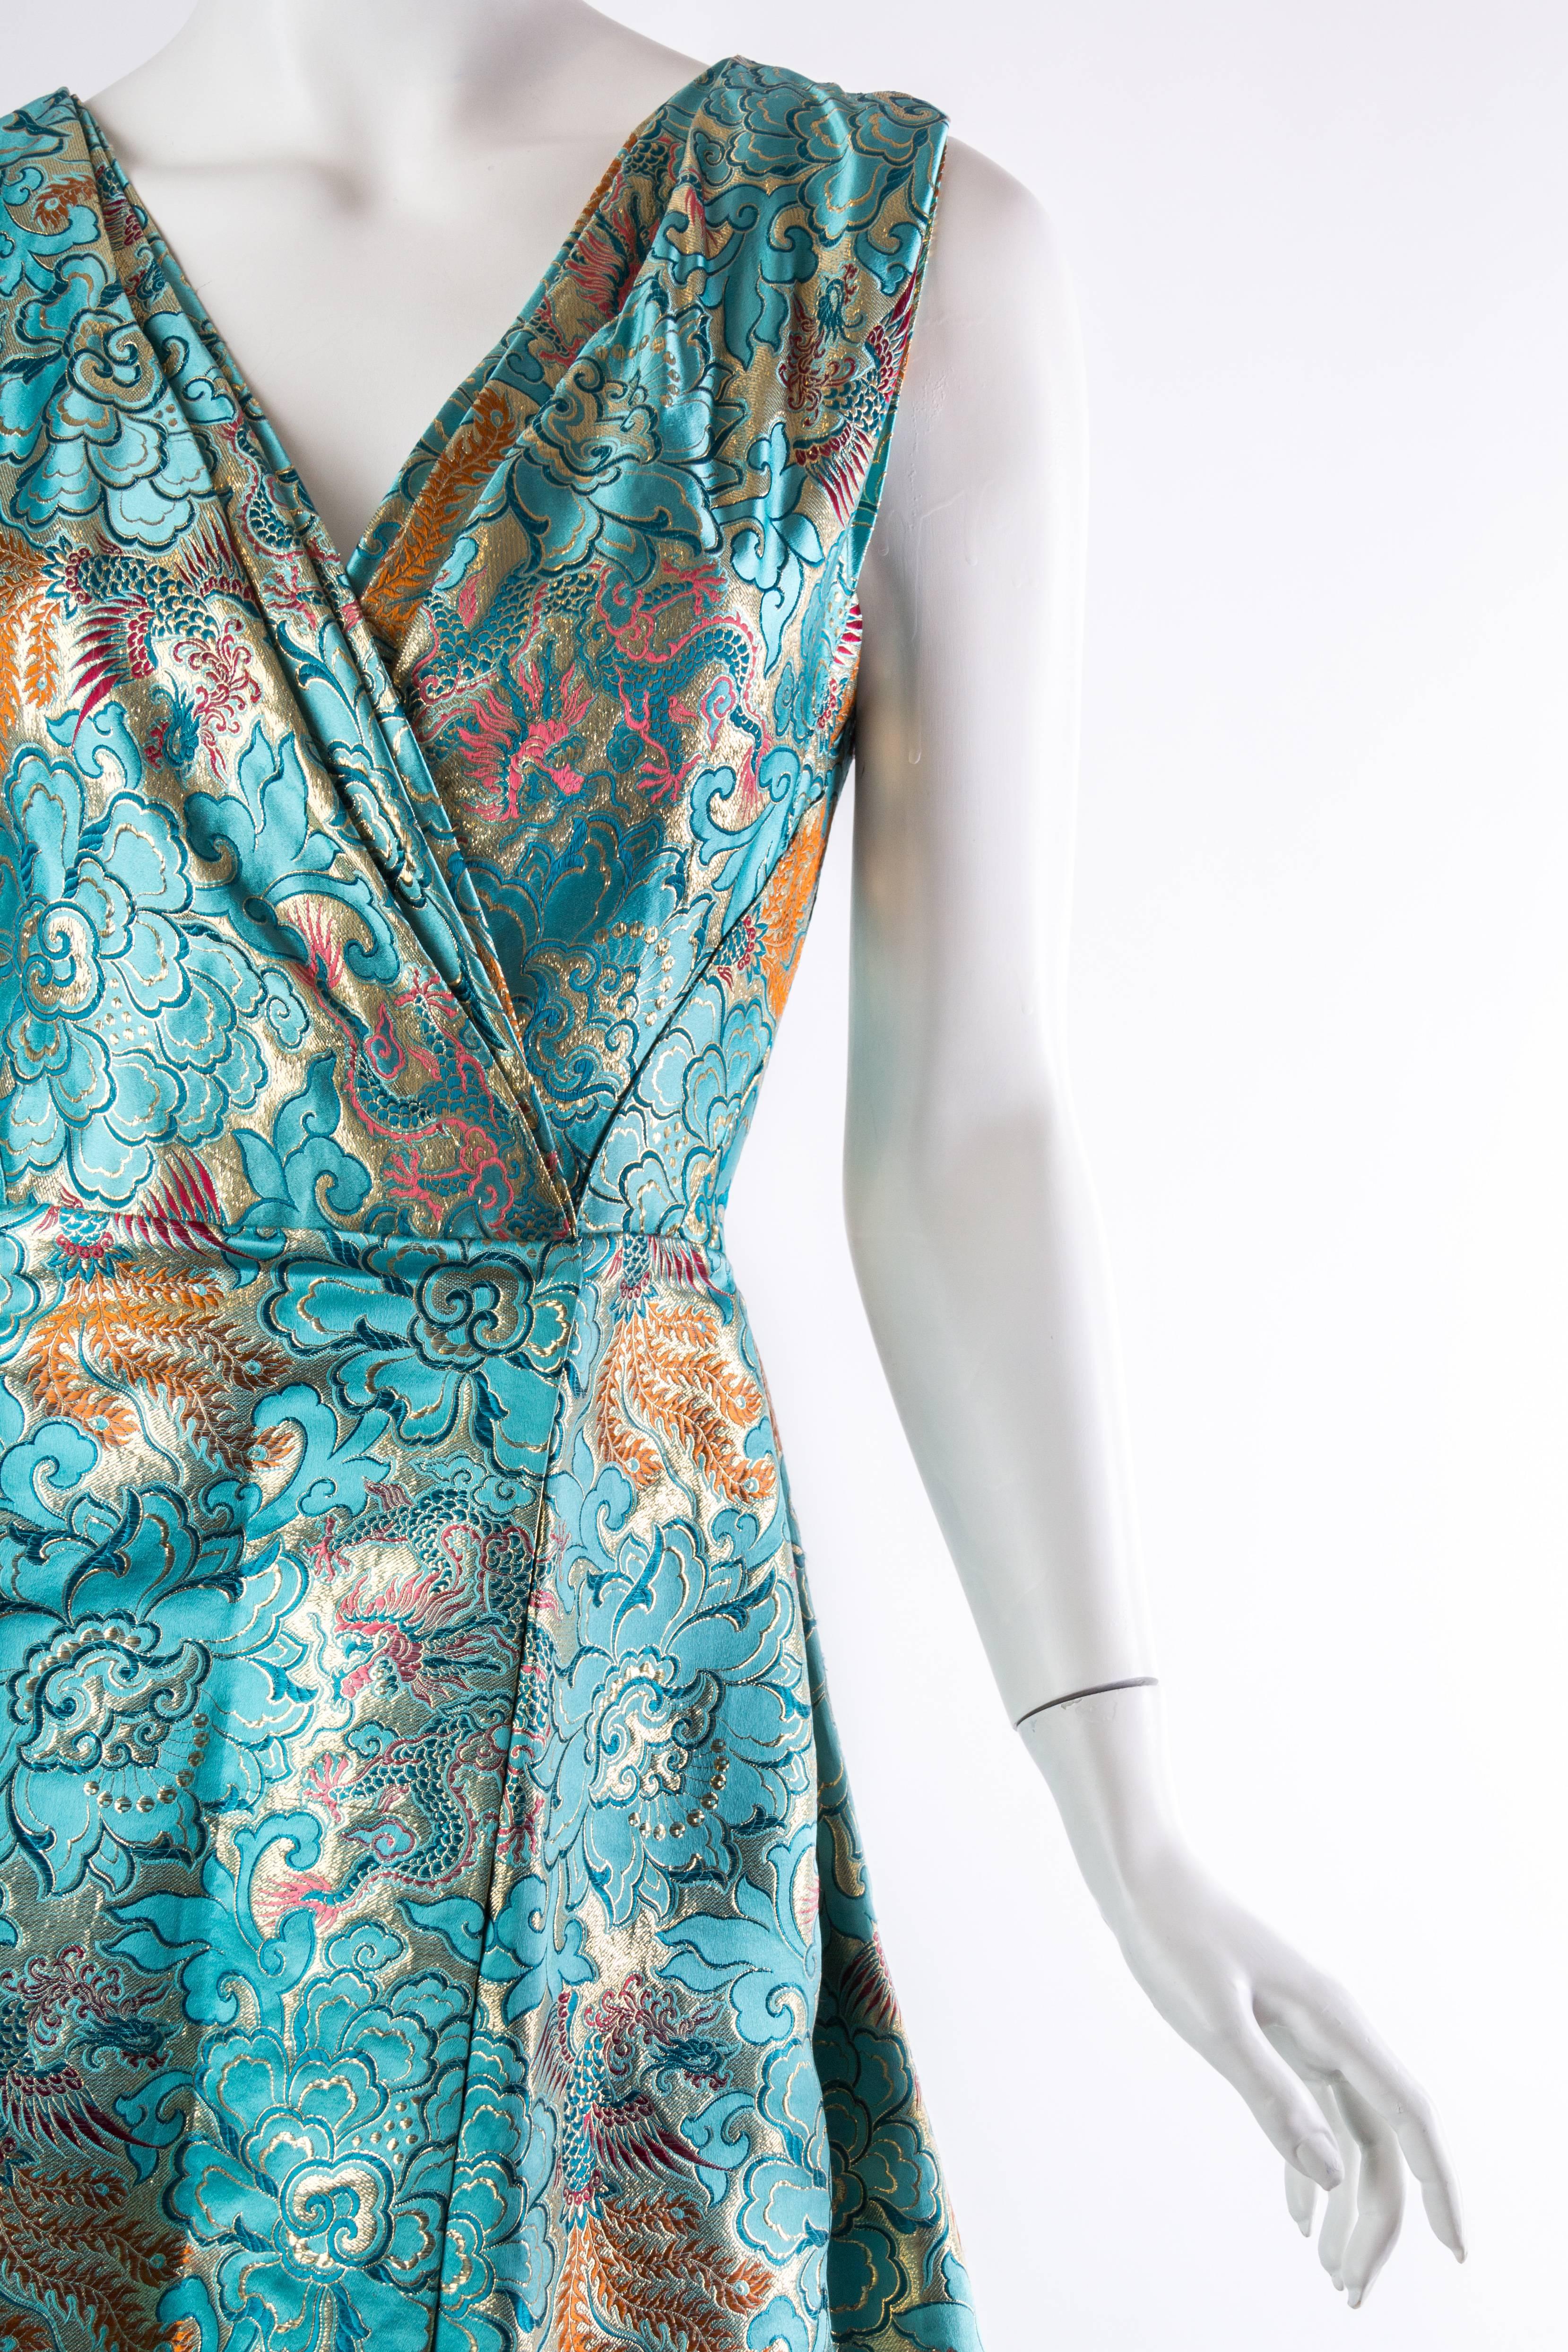 MORPHEW COLLECTION Teal & Gold Asian Dragon And Phoenix Jacquard Reversible Gow In Excellent Condition In New York, NY